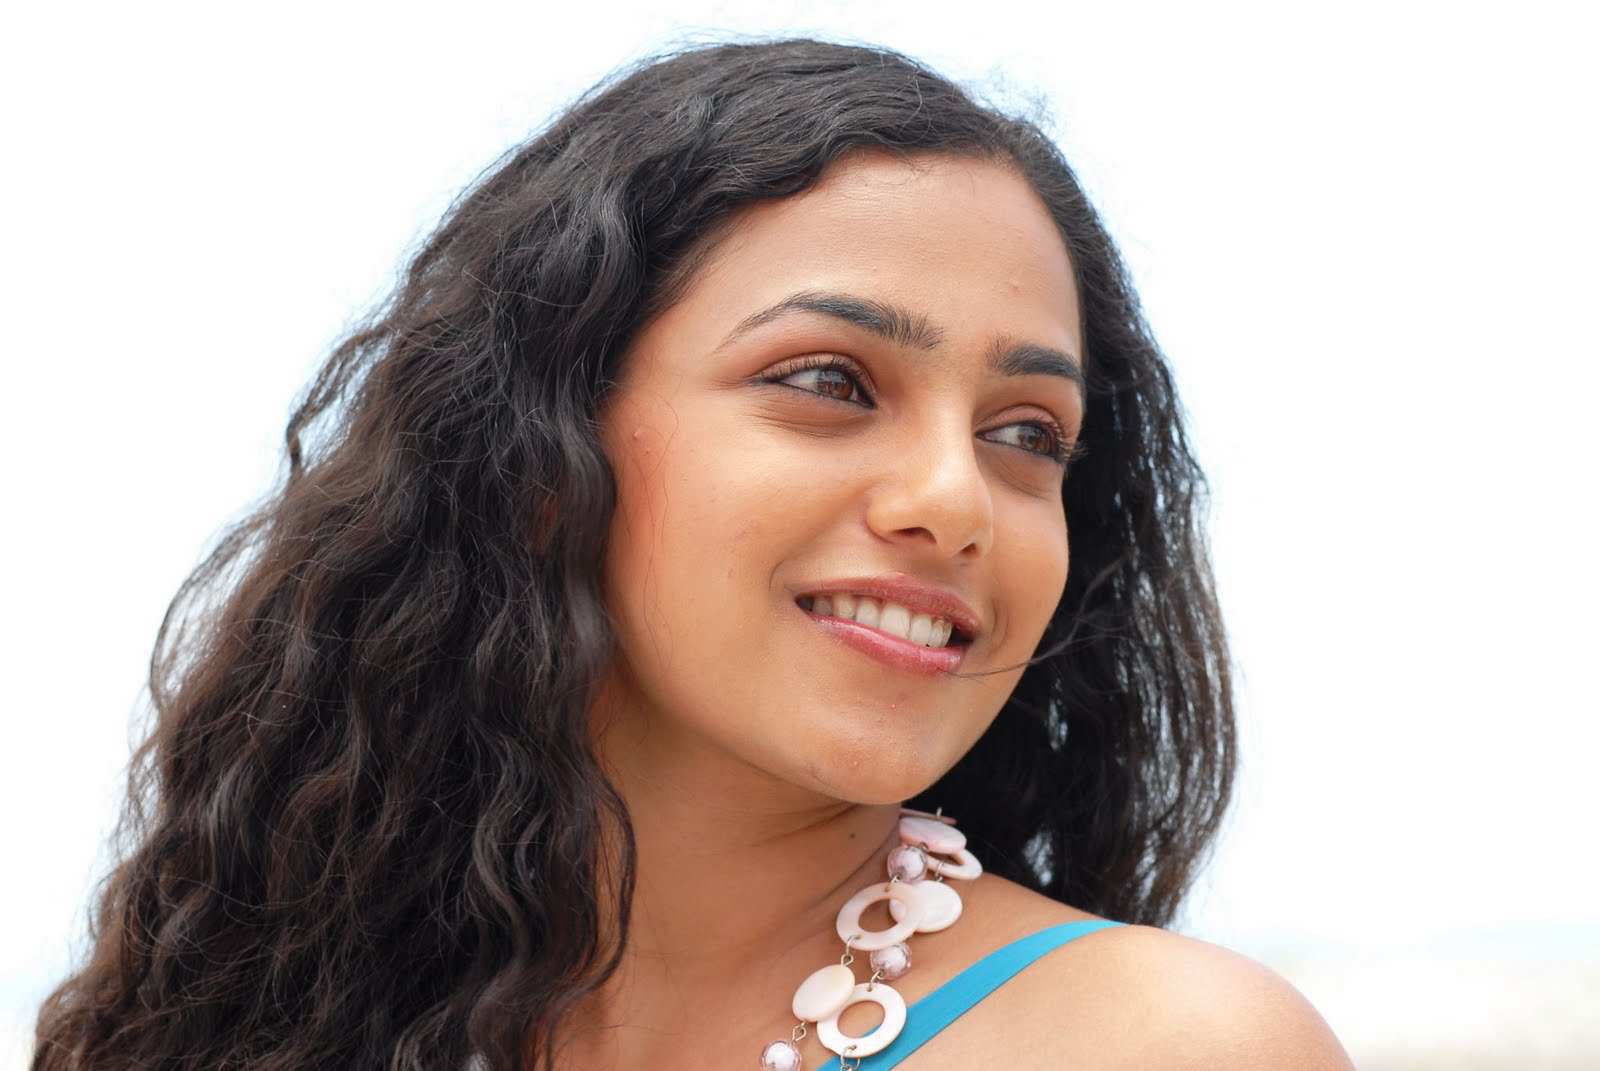  Malayalam Glamours Doll Face Close Up Photos Of Nithya Menon In Blue Top